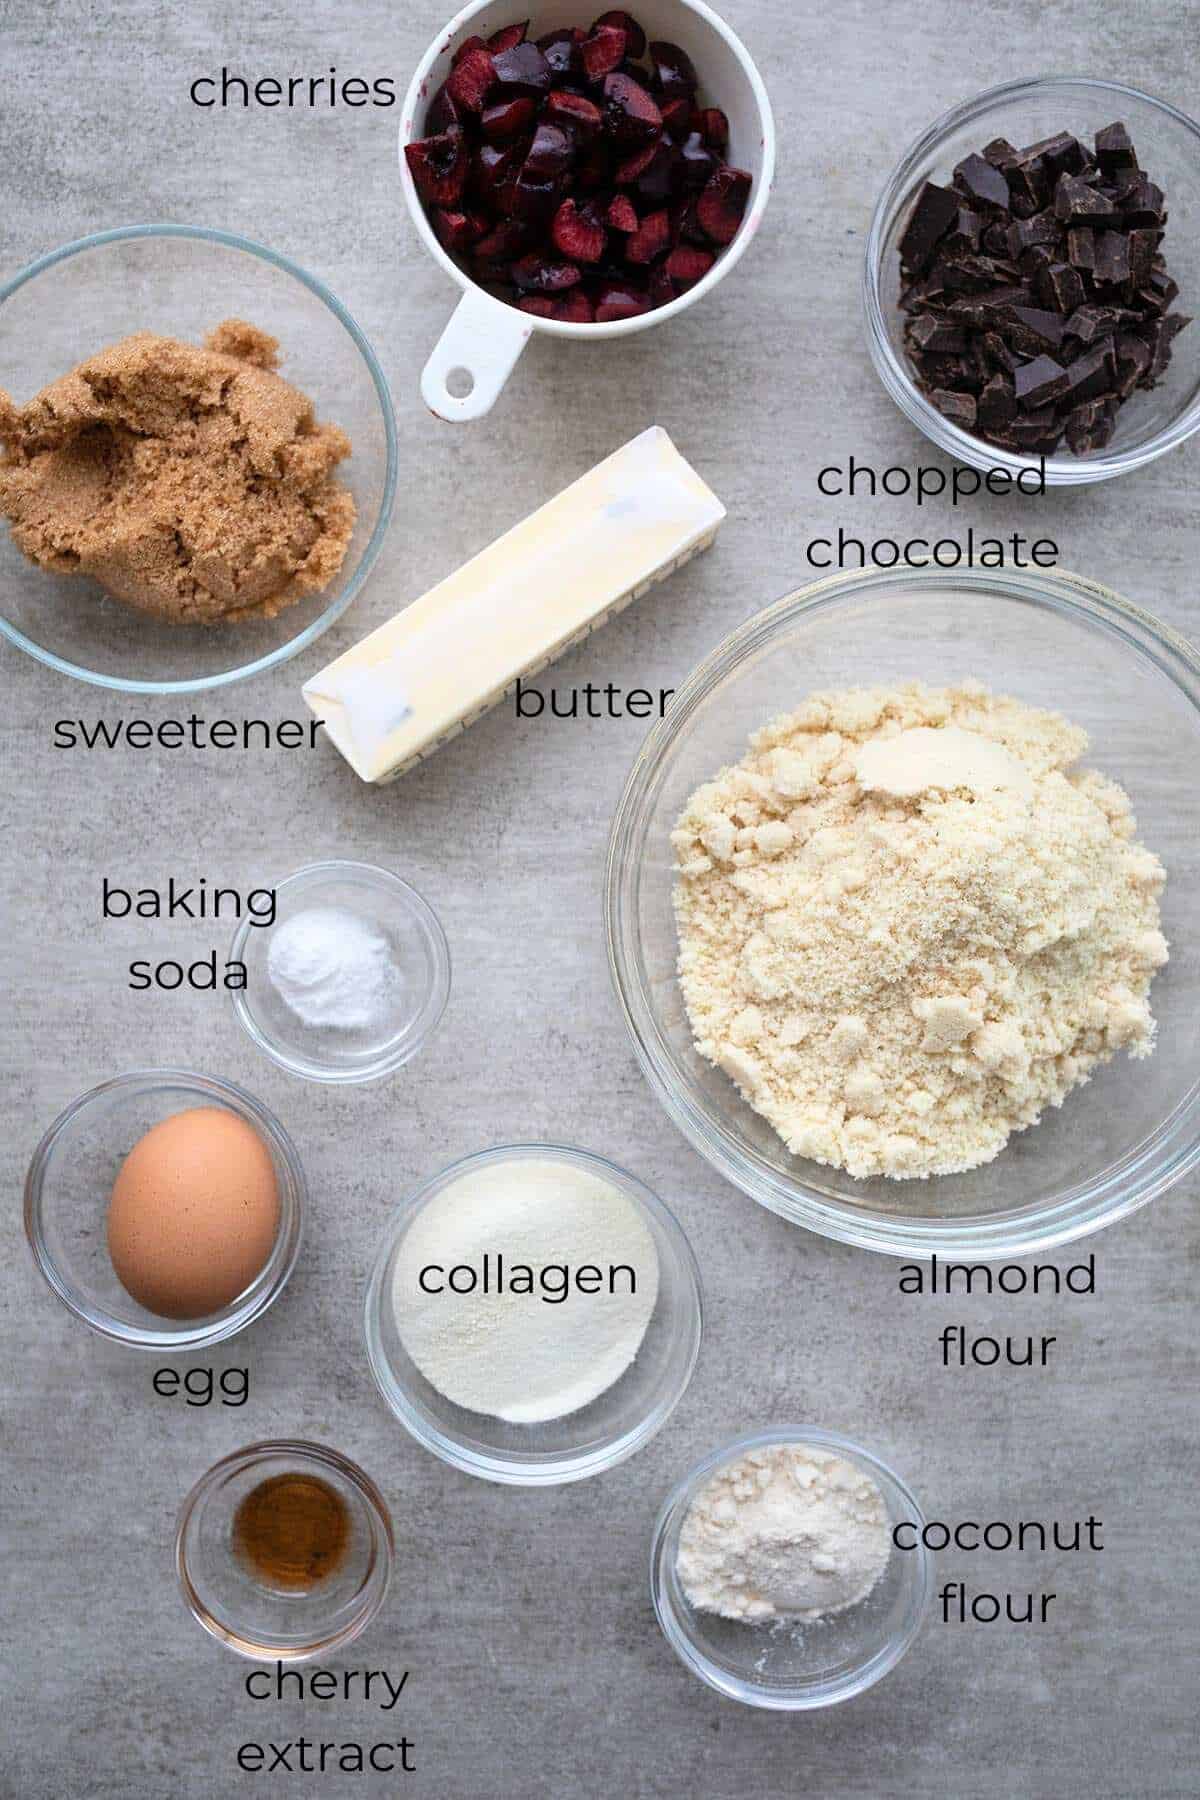 Top down image of ingredients needed for Keto Cherry Chocolate Chunk Cookies.